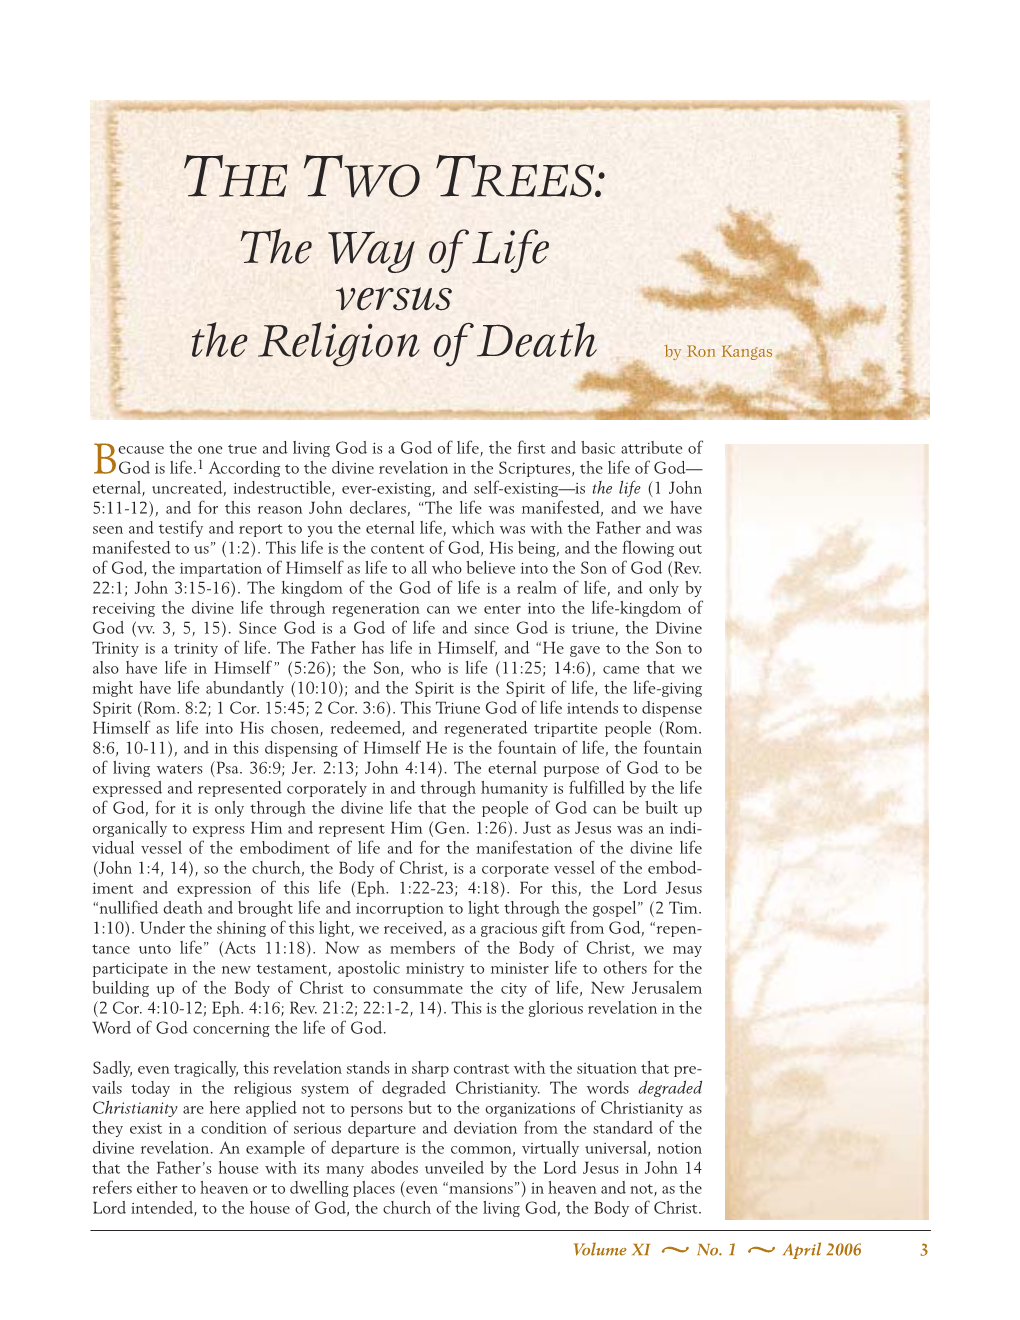 THE TWO TREES: the Way of Life Versus